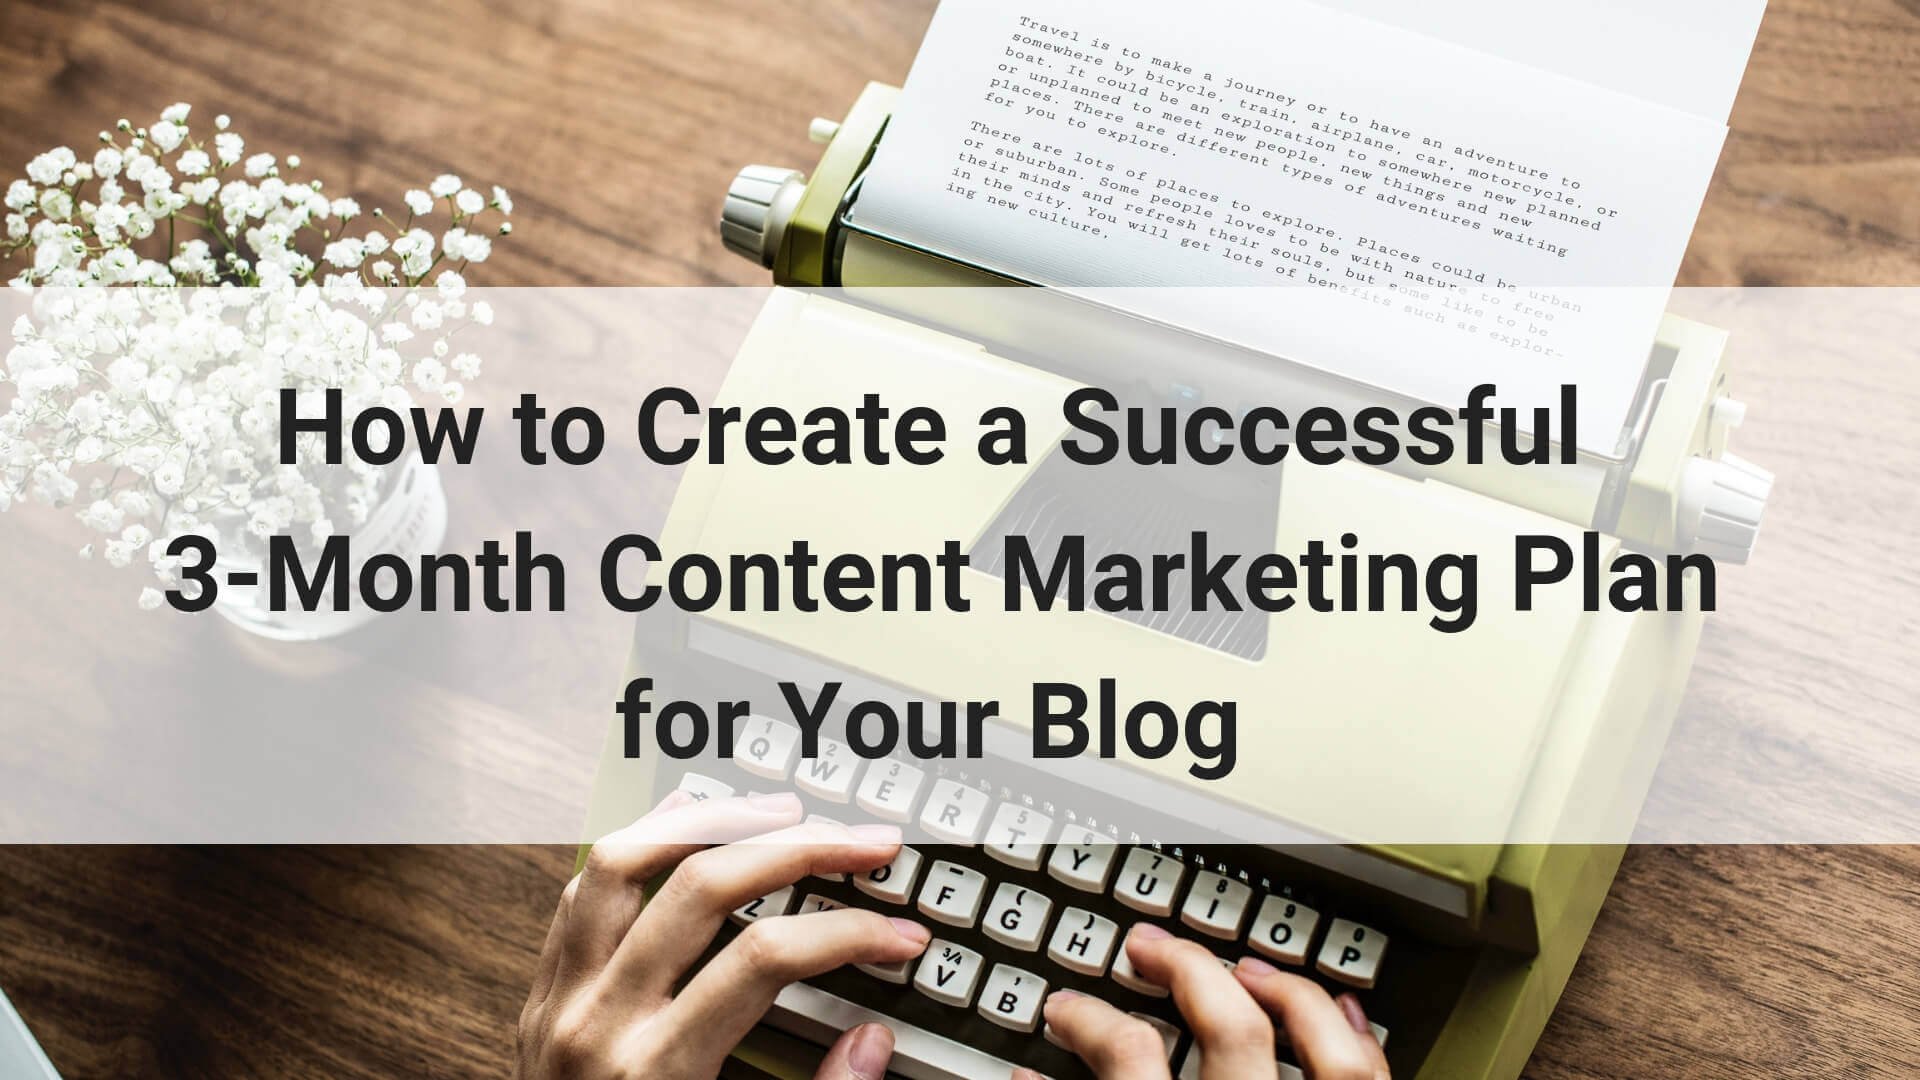 Creating a successful content strategy, whatever your budget